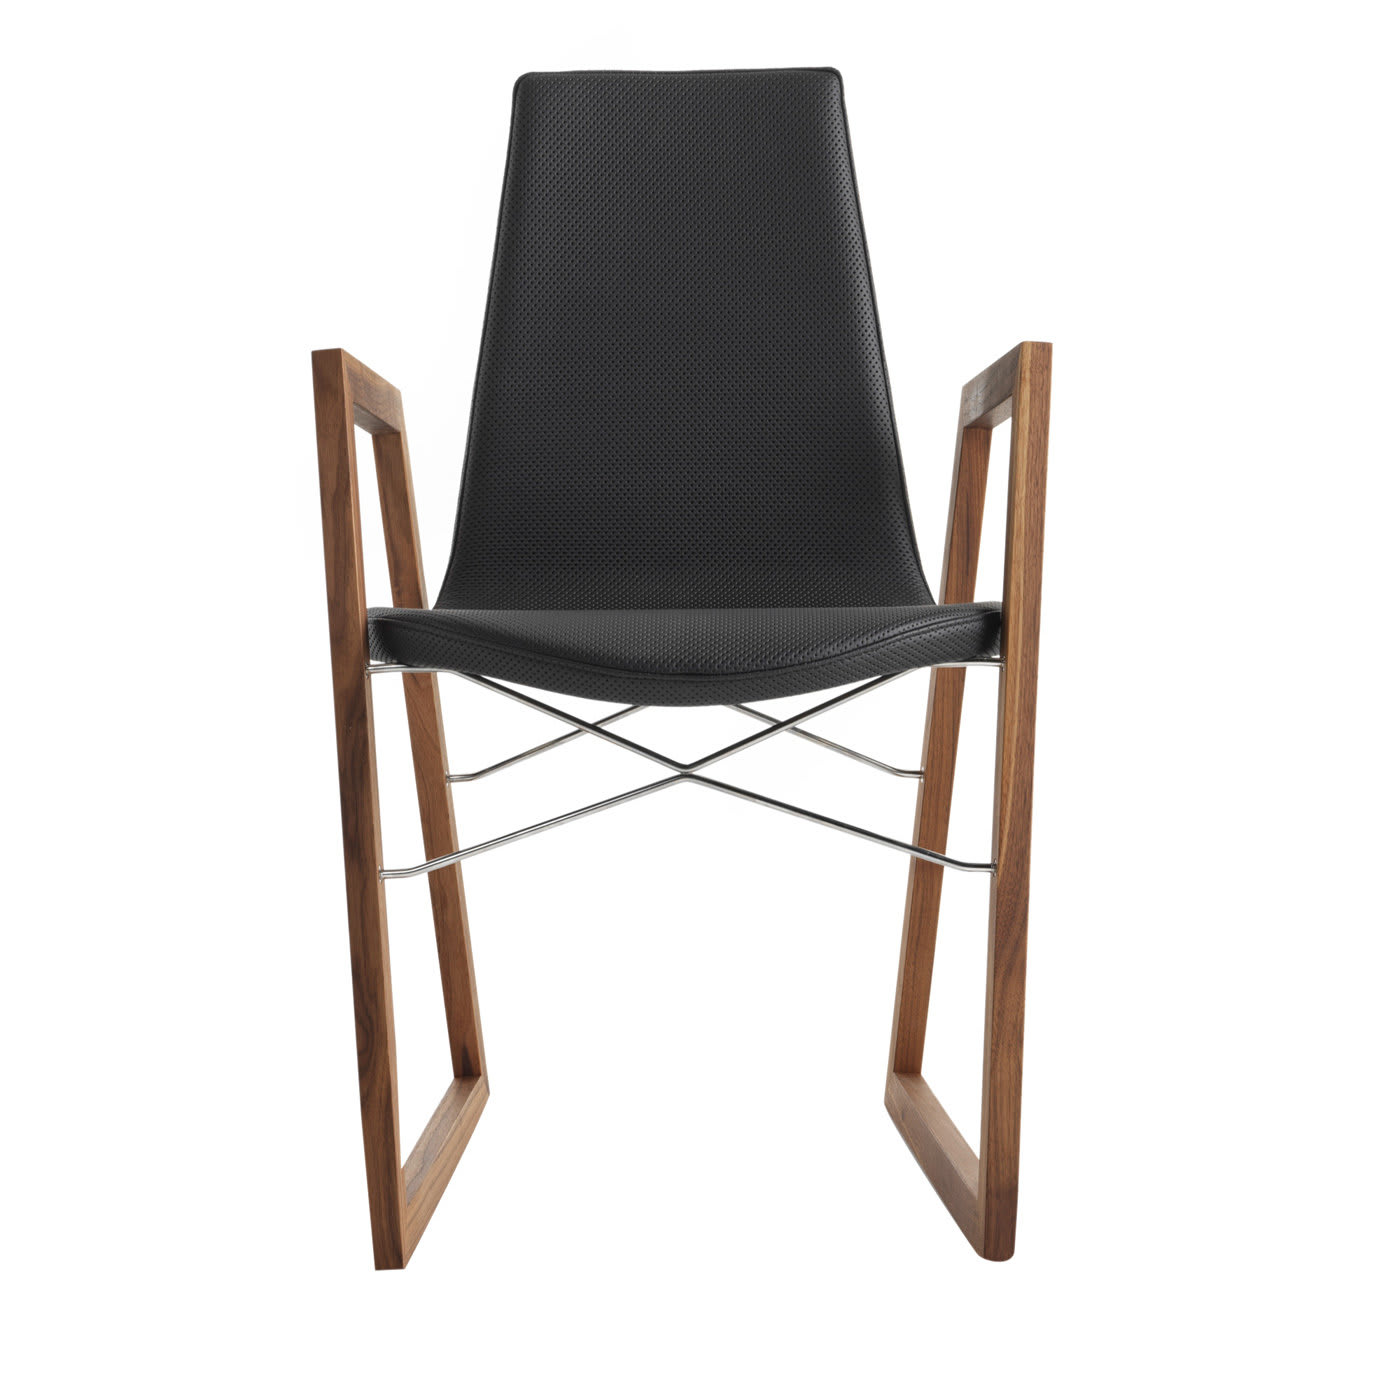 Ray Black Chair by Orlandini Design - Horm